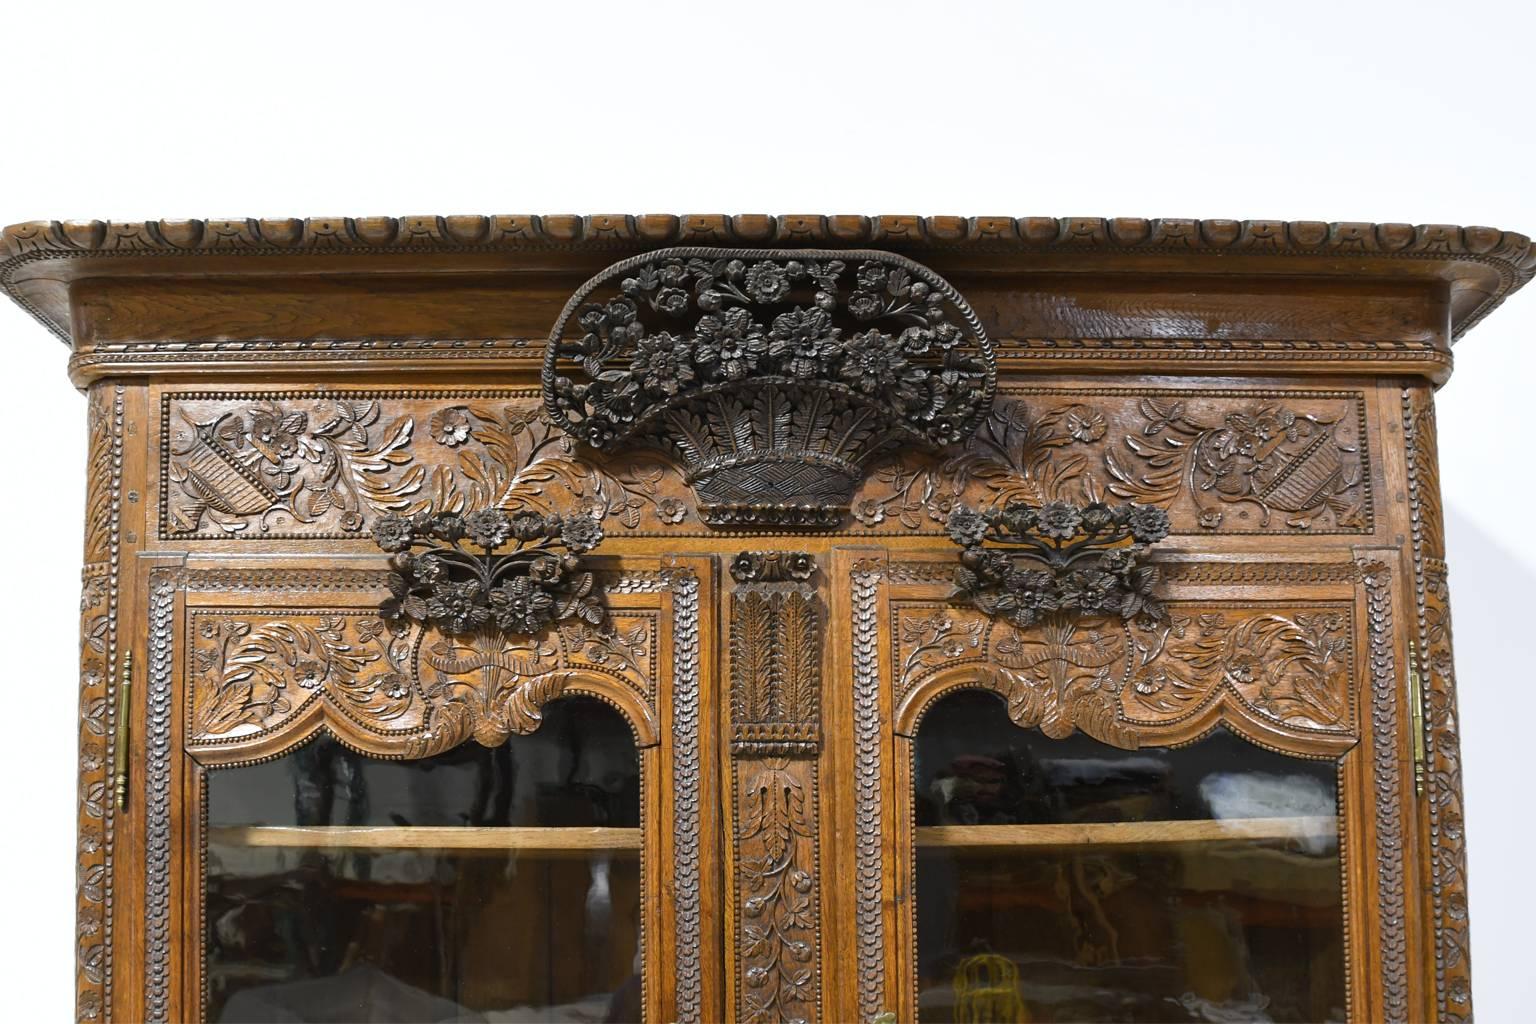 A lavishly carved wedding piece, this oak buffet a deux-corps from Normandy, is embellished with foliage and flowers in carved relief, as well as offering beautifully-articulated applied carvings in high relief as seen in the central flower-filled